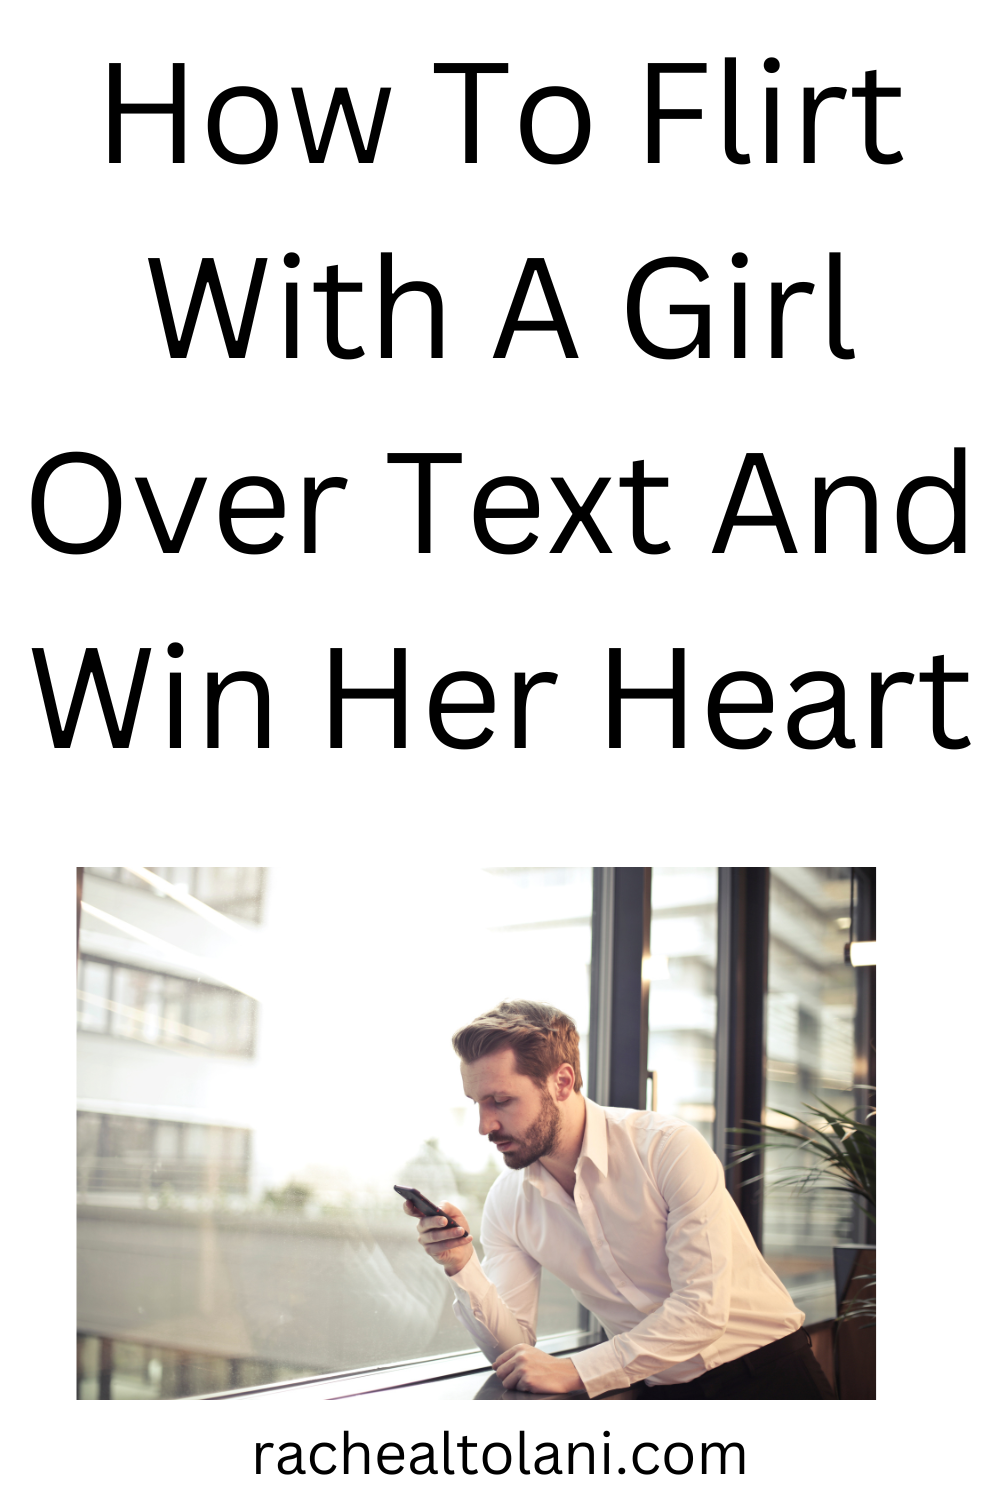 How To Flirt With A Girl Over Text And Win Her Heart 0758